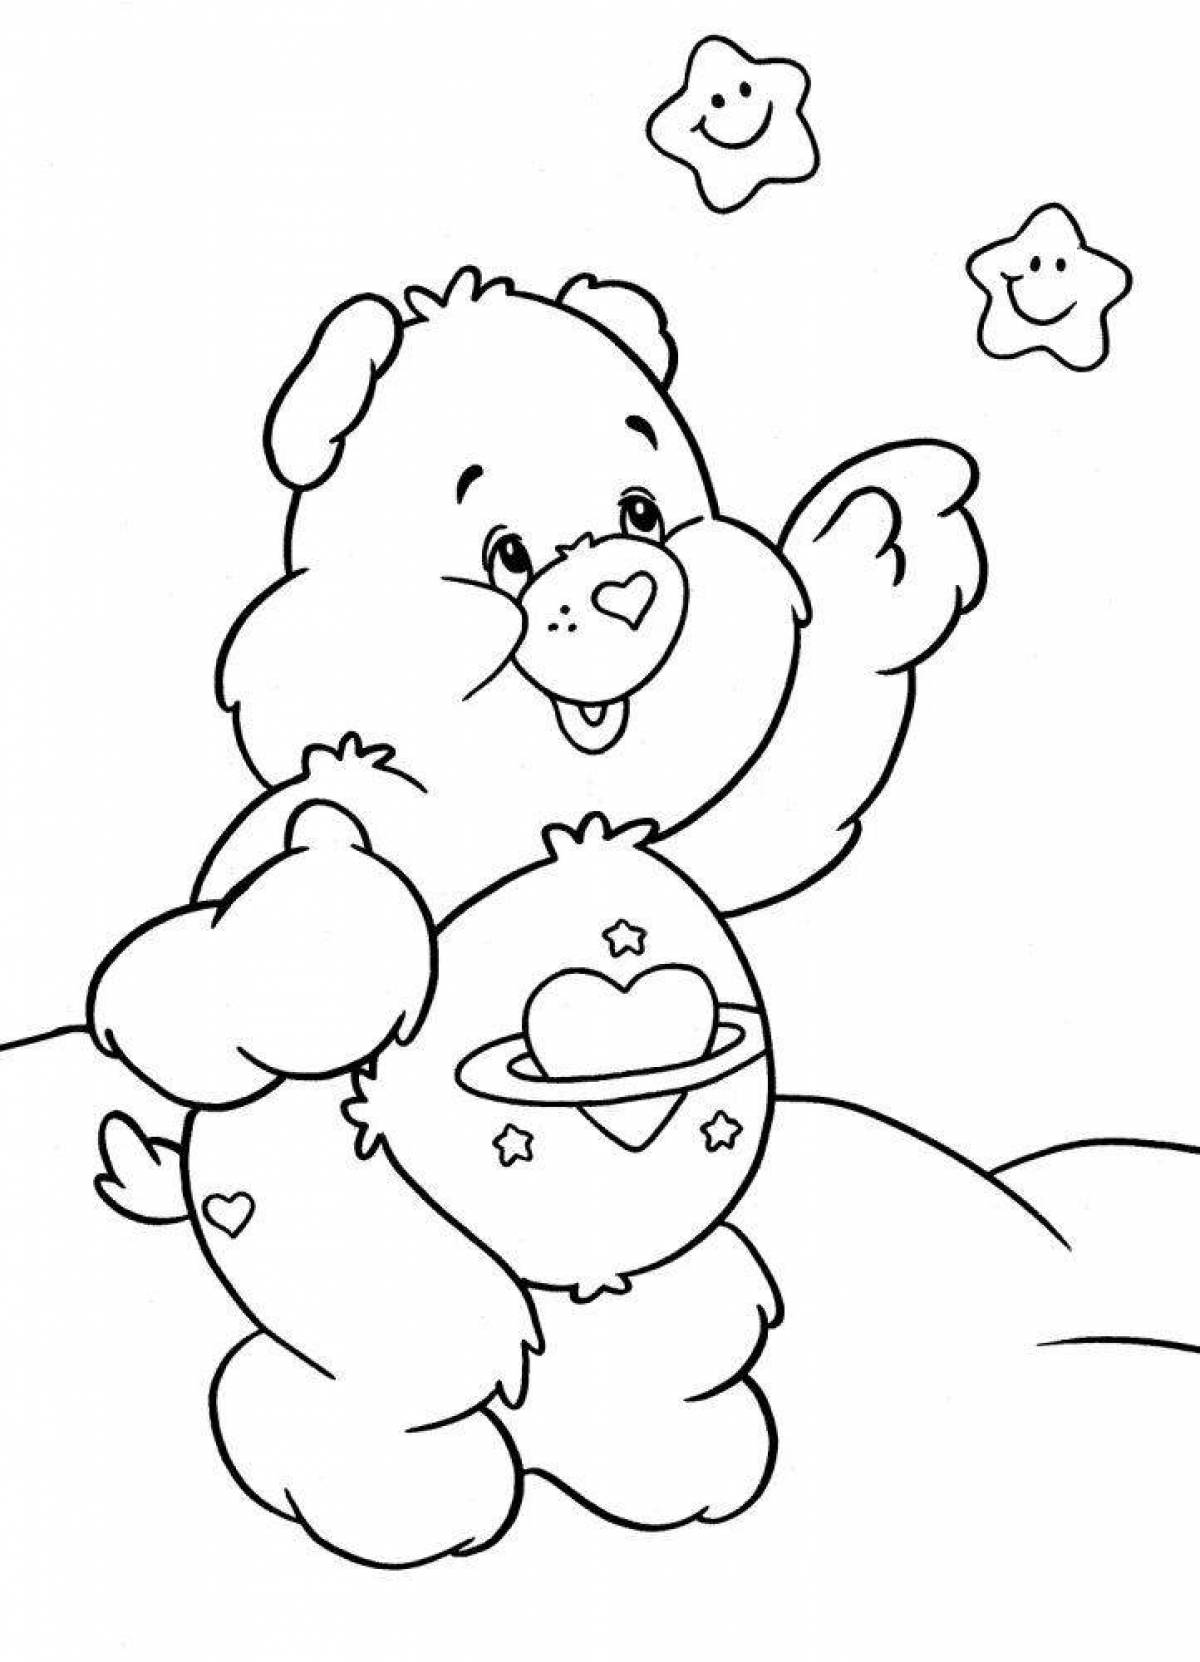 Sunny care bears coloring page